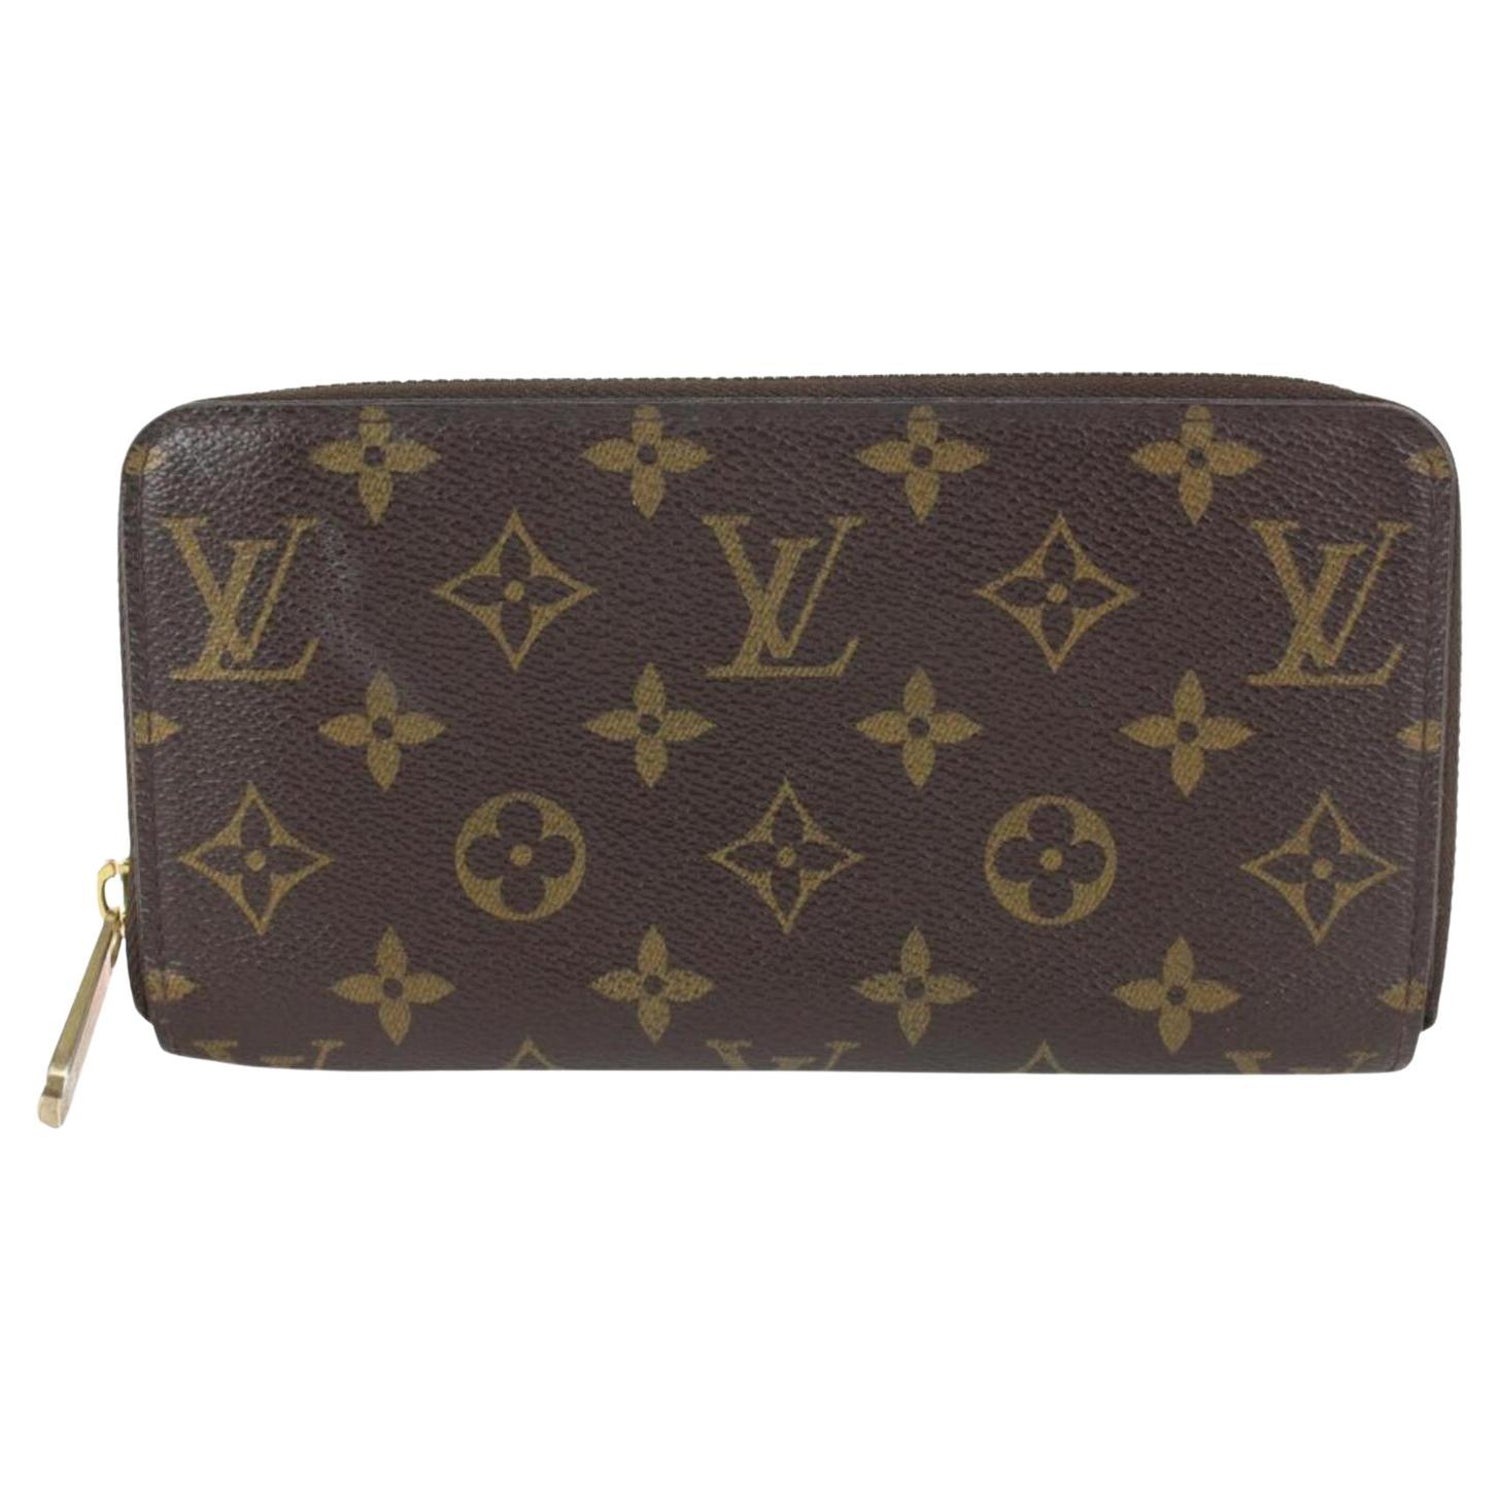 Wallet on Chain Ivy Monogram Canvas - Wallets and Small Leather Goods